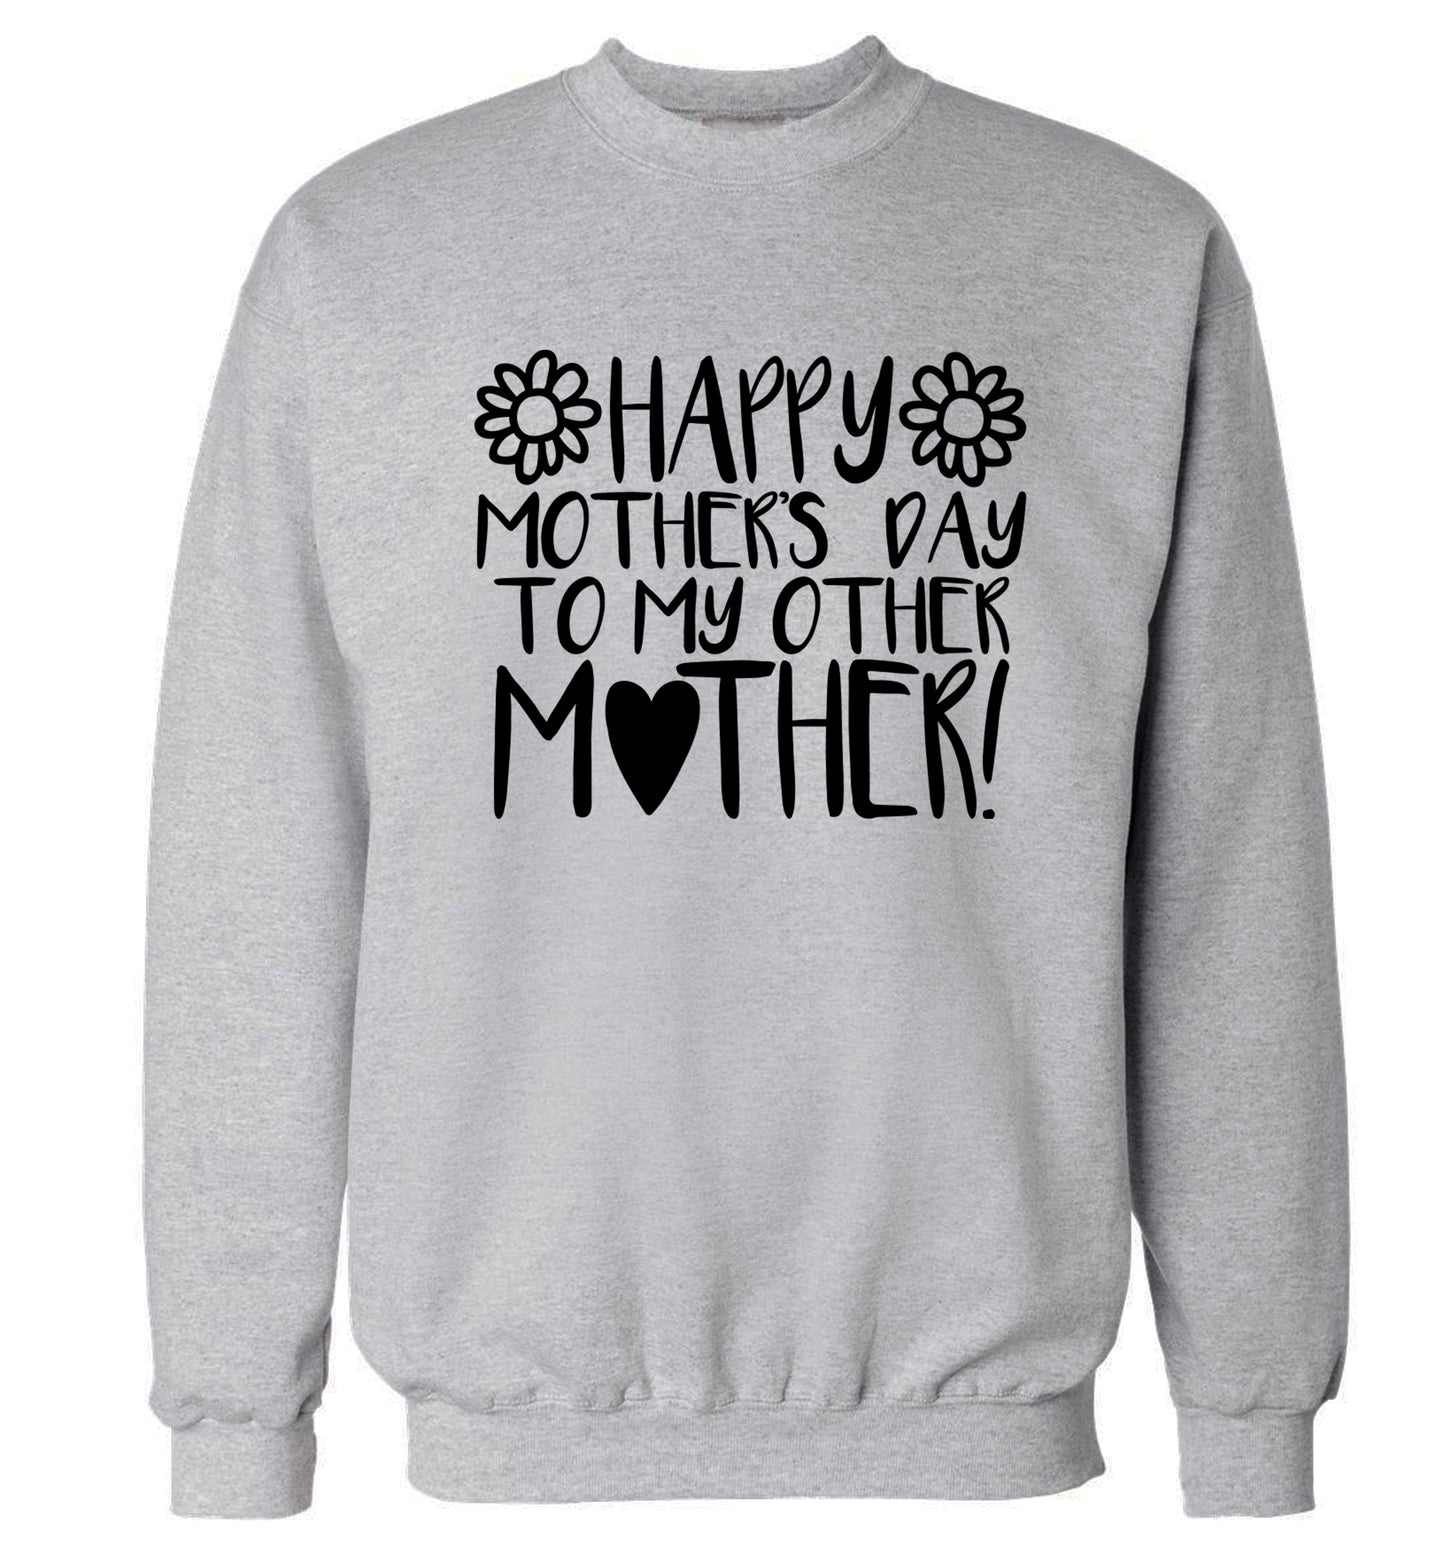 Happy mother's day to my other mother Adult's unisex grey Sweater 2XL